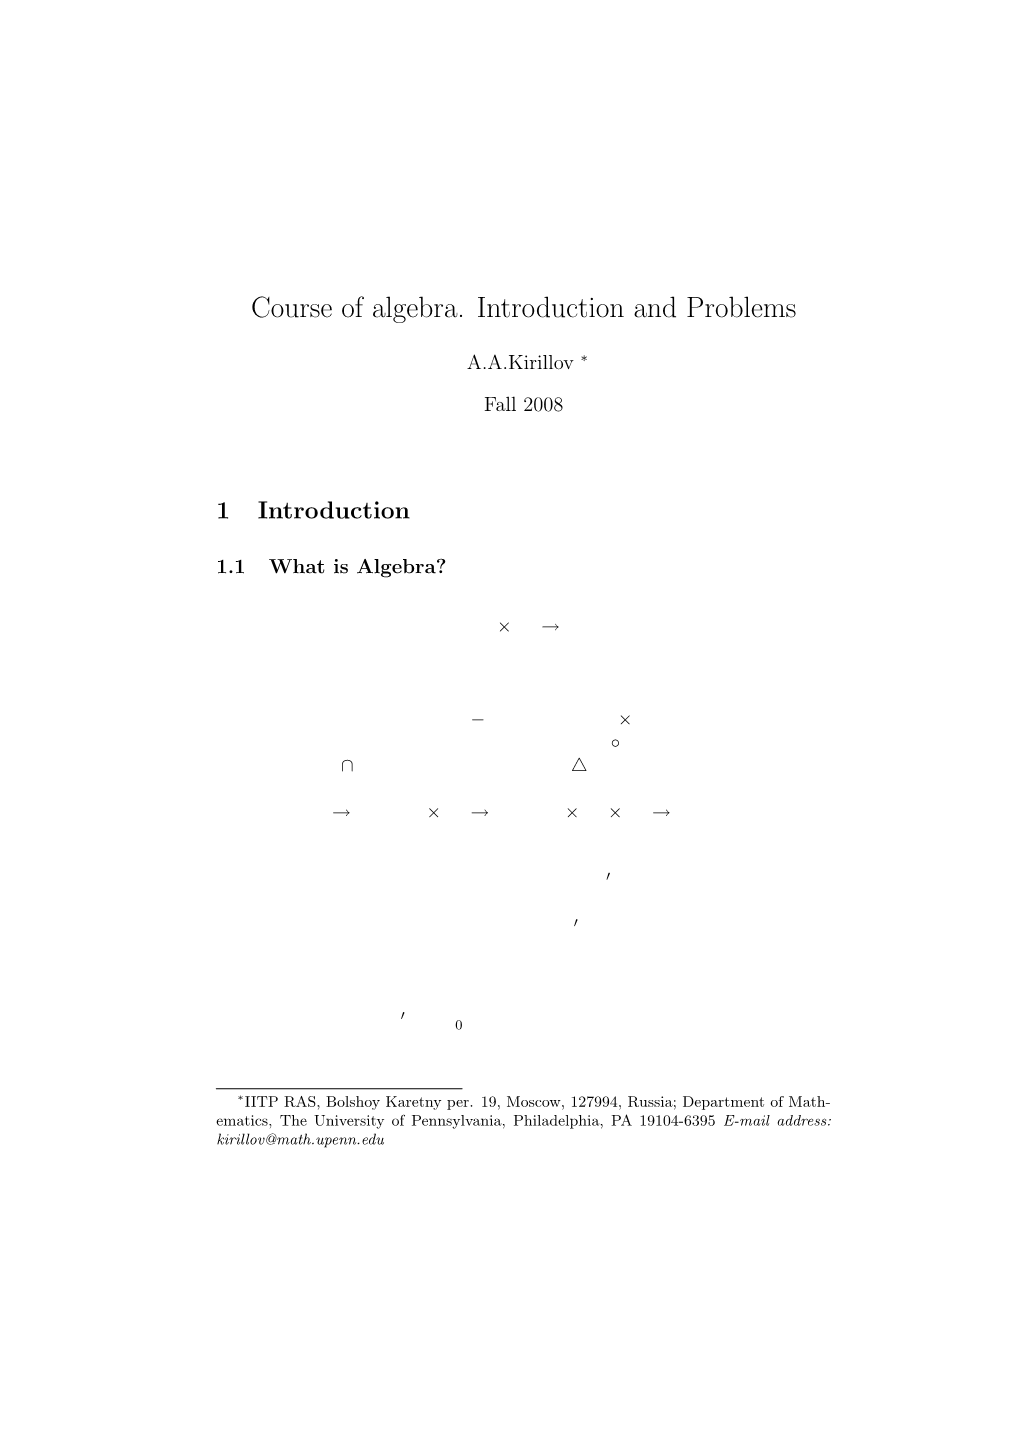 Course of Algebra. Introduction and Problems